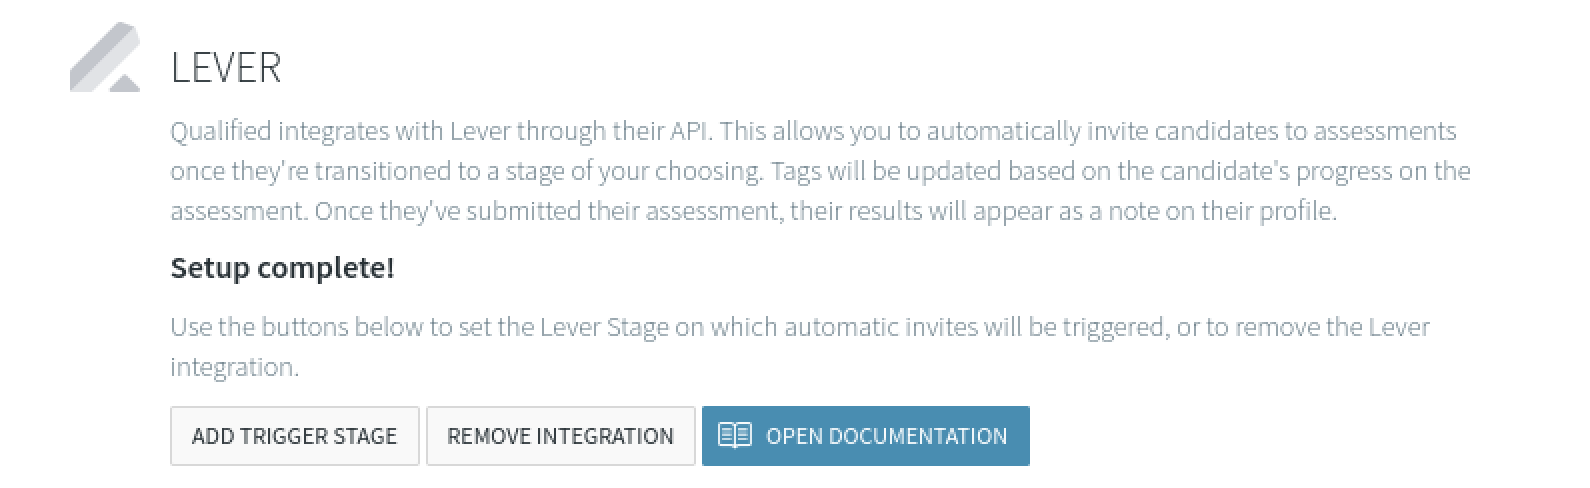 Add trigger stage button on Lever integration set up confimration screen in Qualified.io